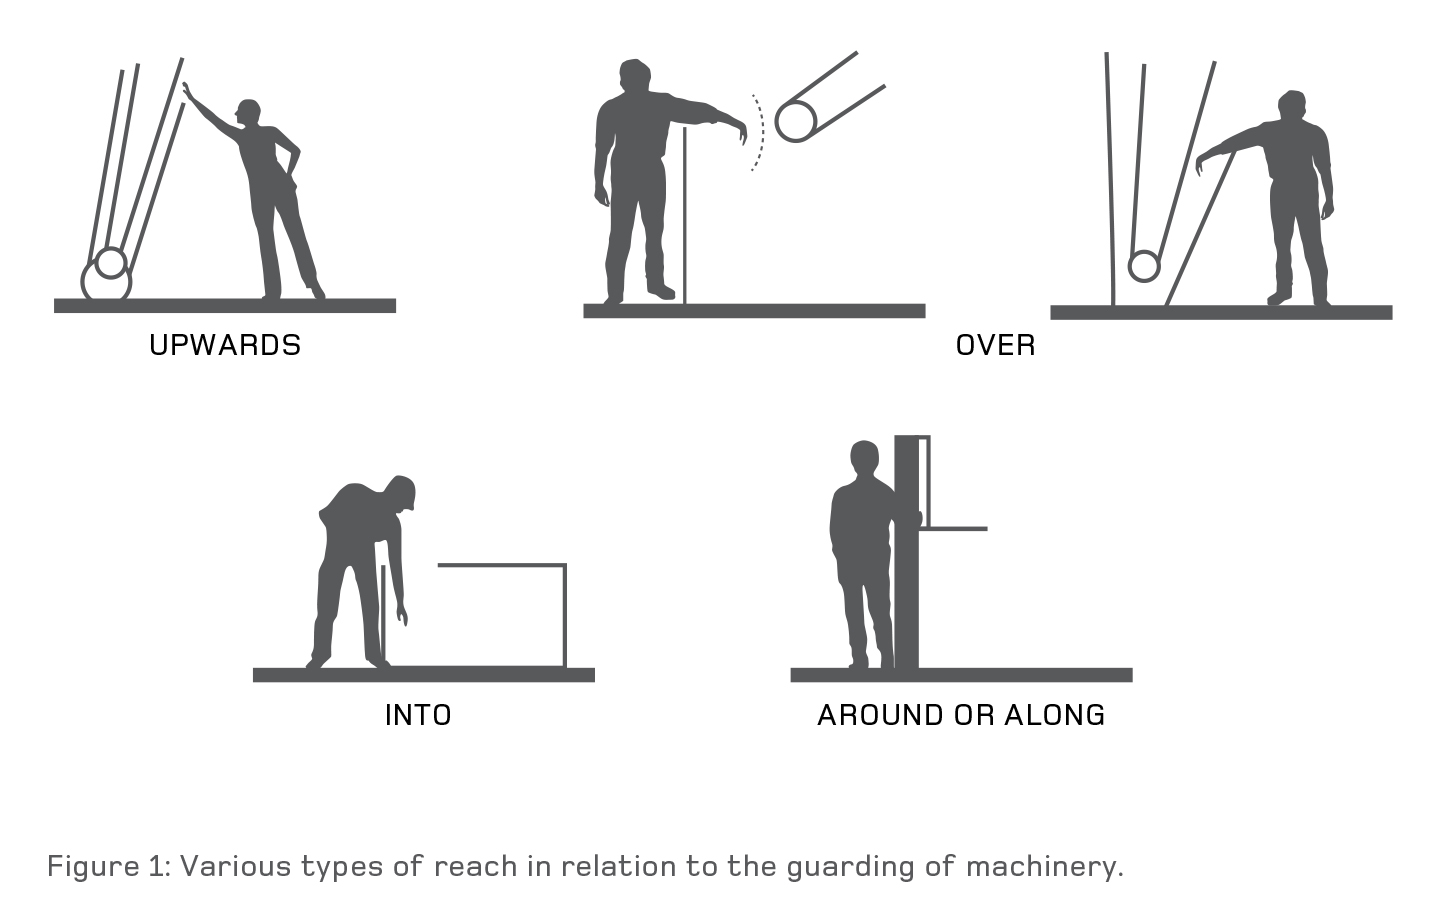 [image] Figure 1: Various types of reach in relation to the guarding of machinery